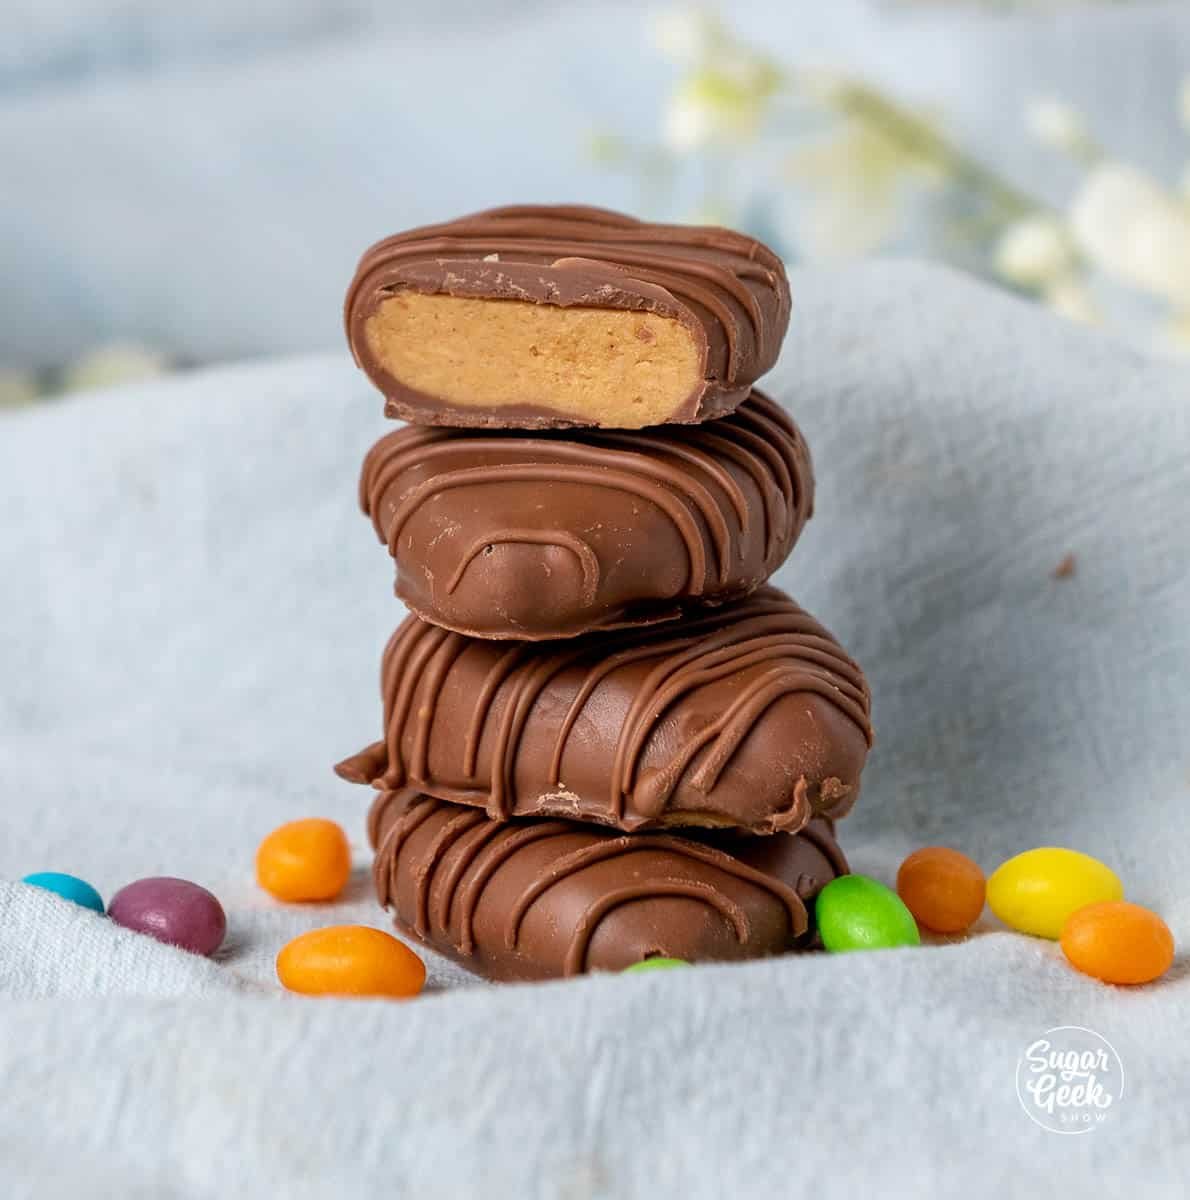 Peanut butter chocolate eggs stacked on a blue towel